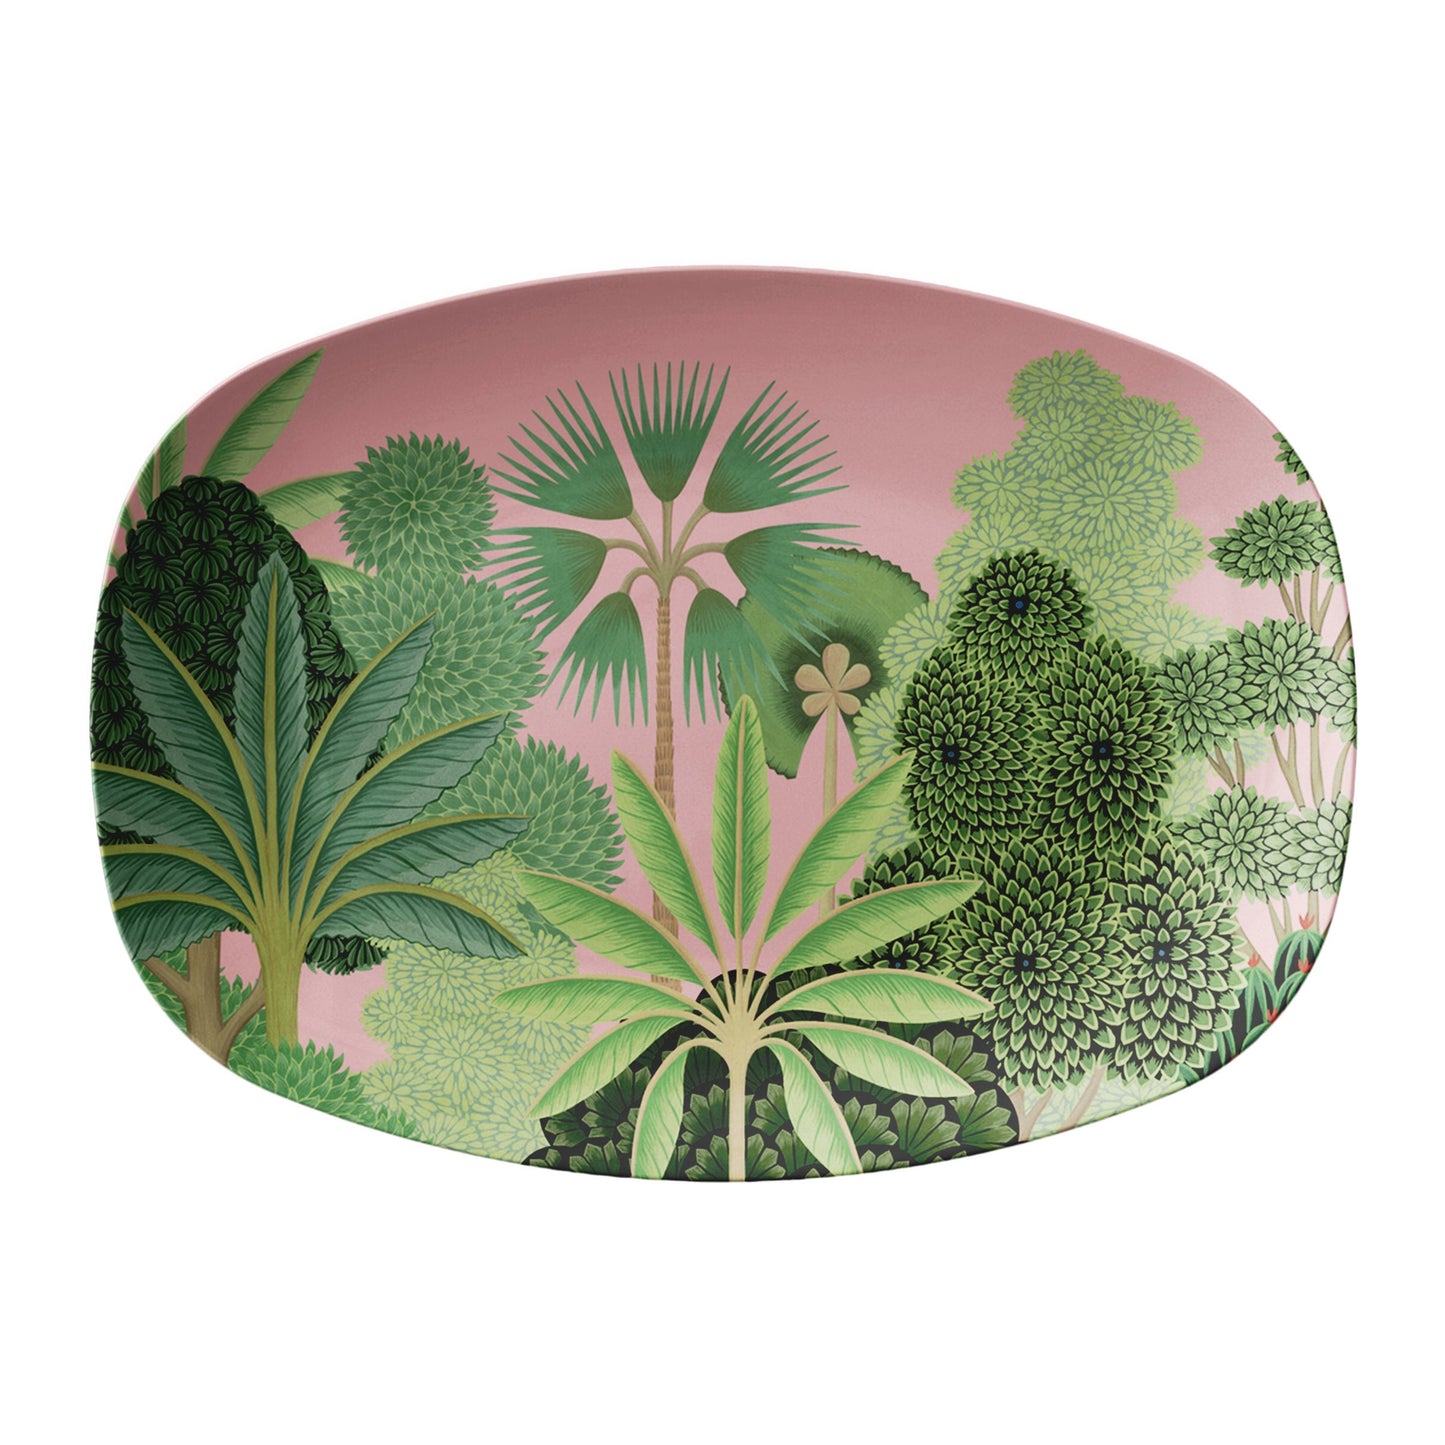 Tropical Serving Platter, Pink & Green, Mughal Gardens, Luxury Thermosaf Plastic